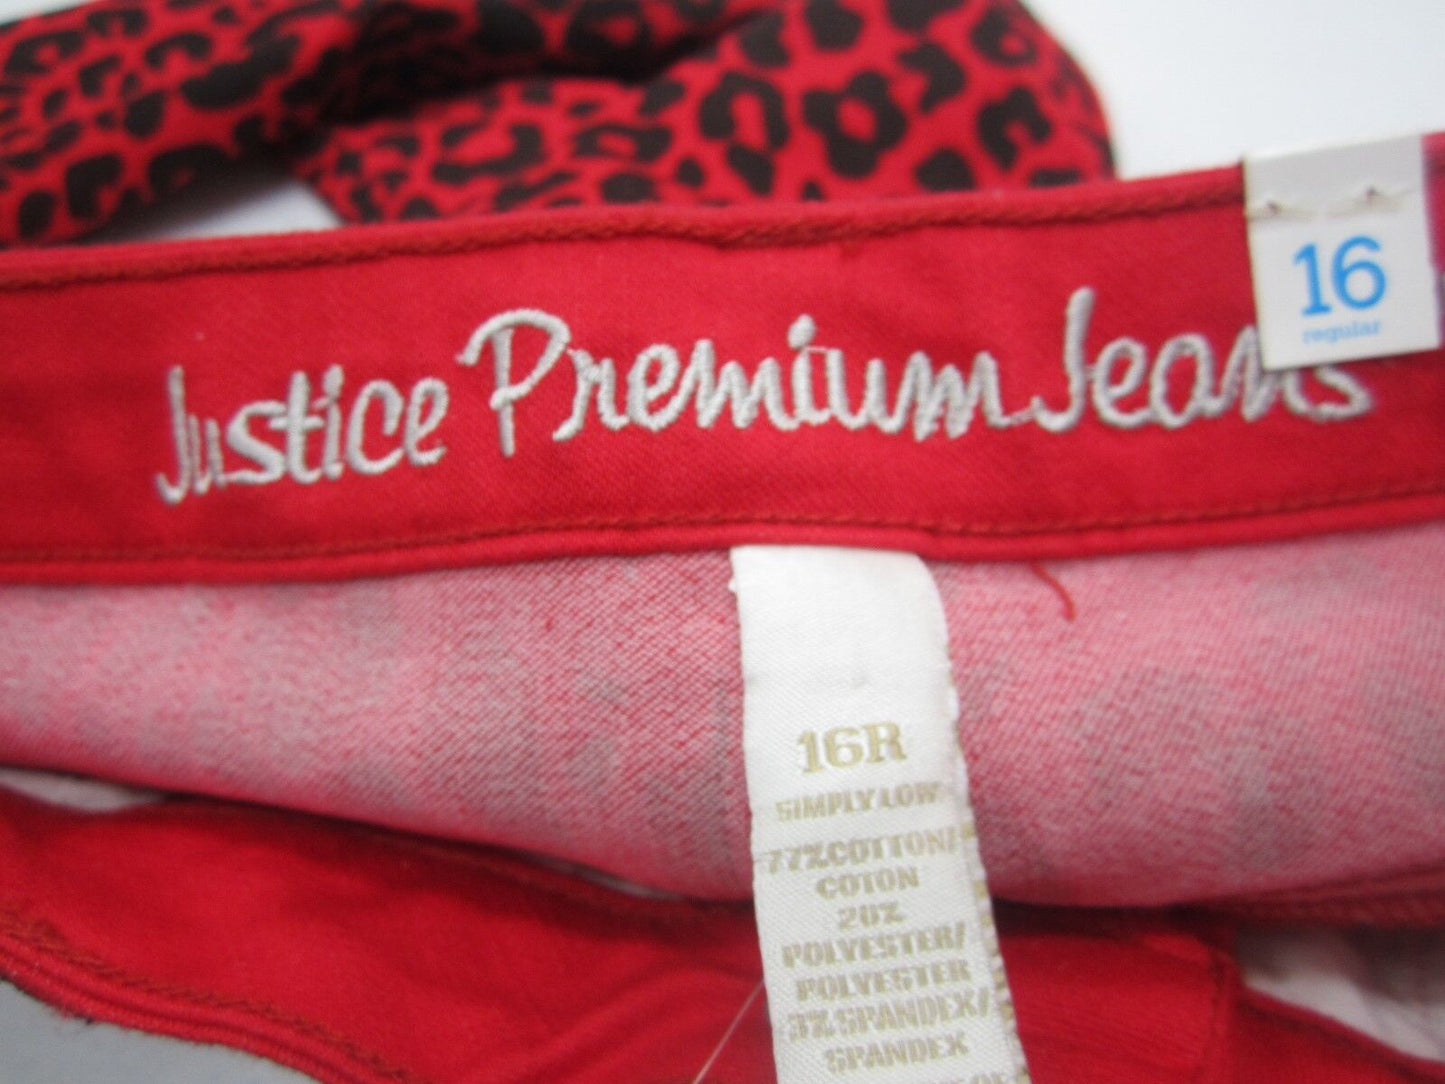 NWT  Justice Girls Premium Red/Blk  Jeans Low Rise Super Skinny Size 16R x 30.5"